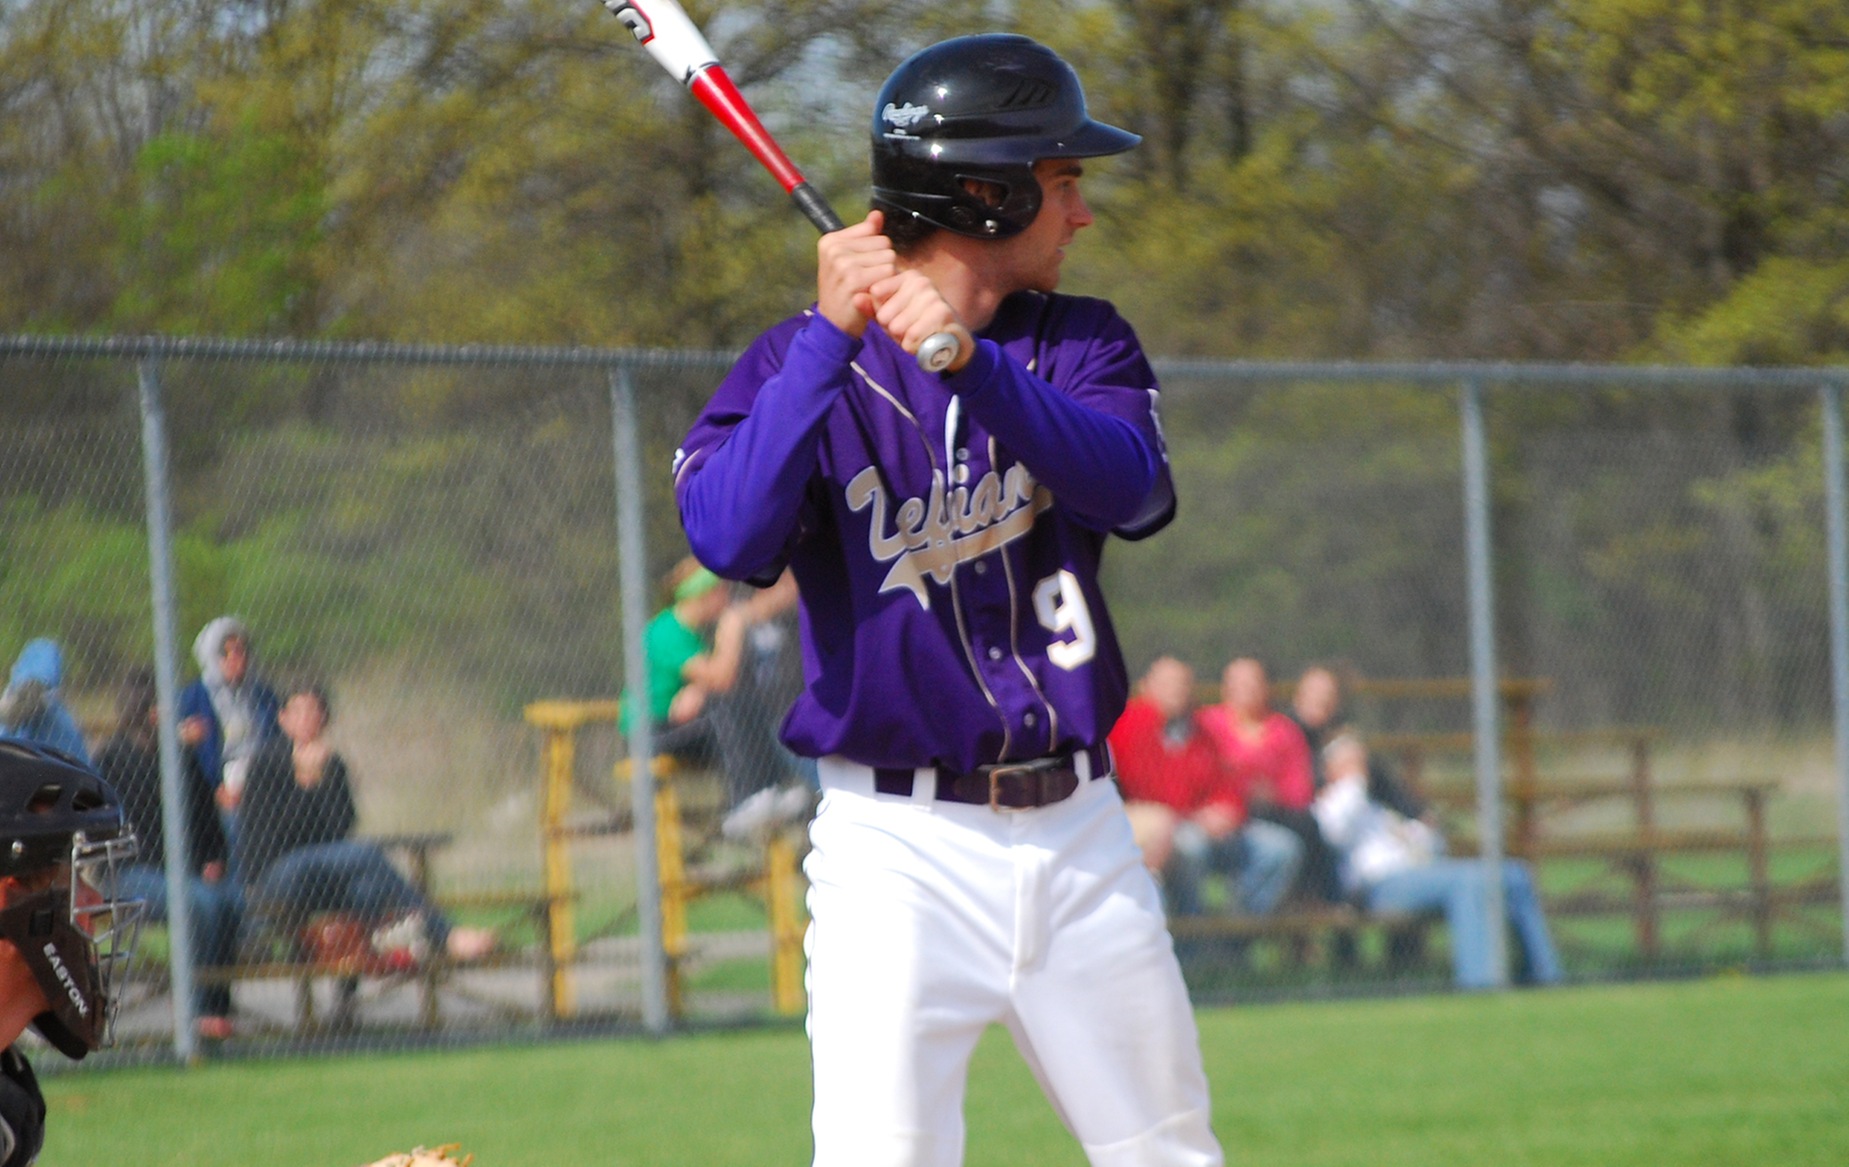 Bluffton Outslugs Defiance, 16-14, in 10-Inning Affair